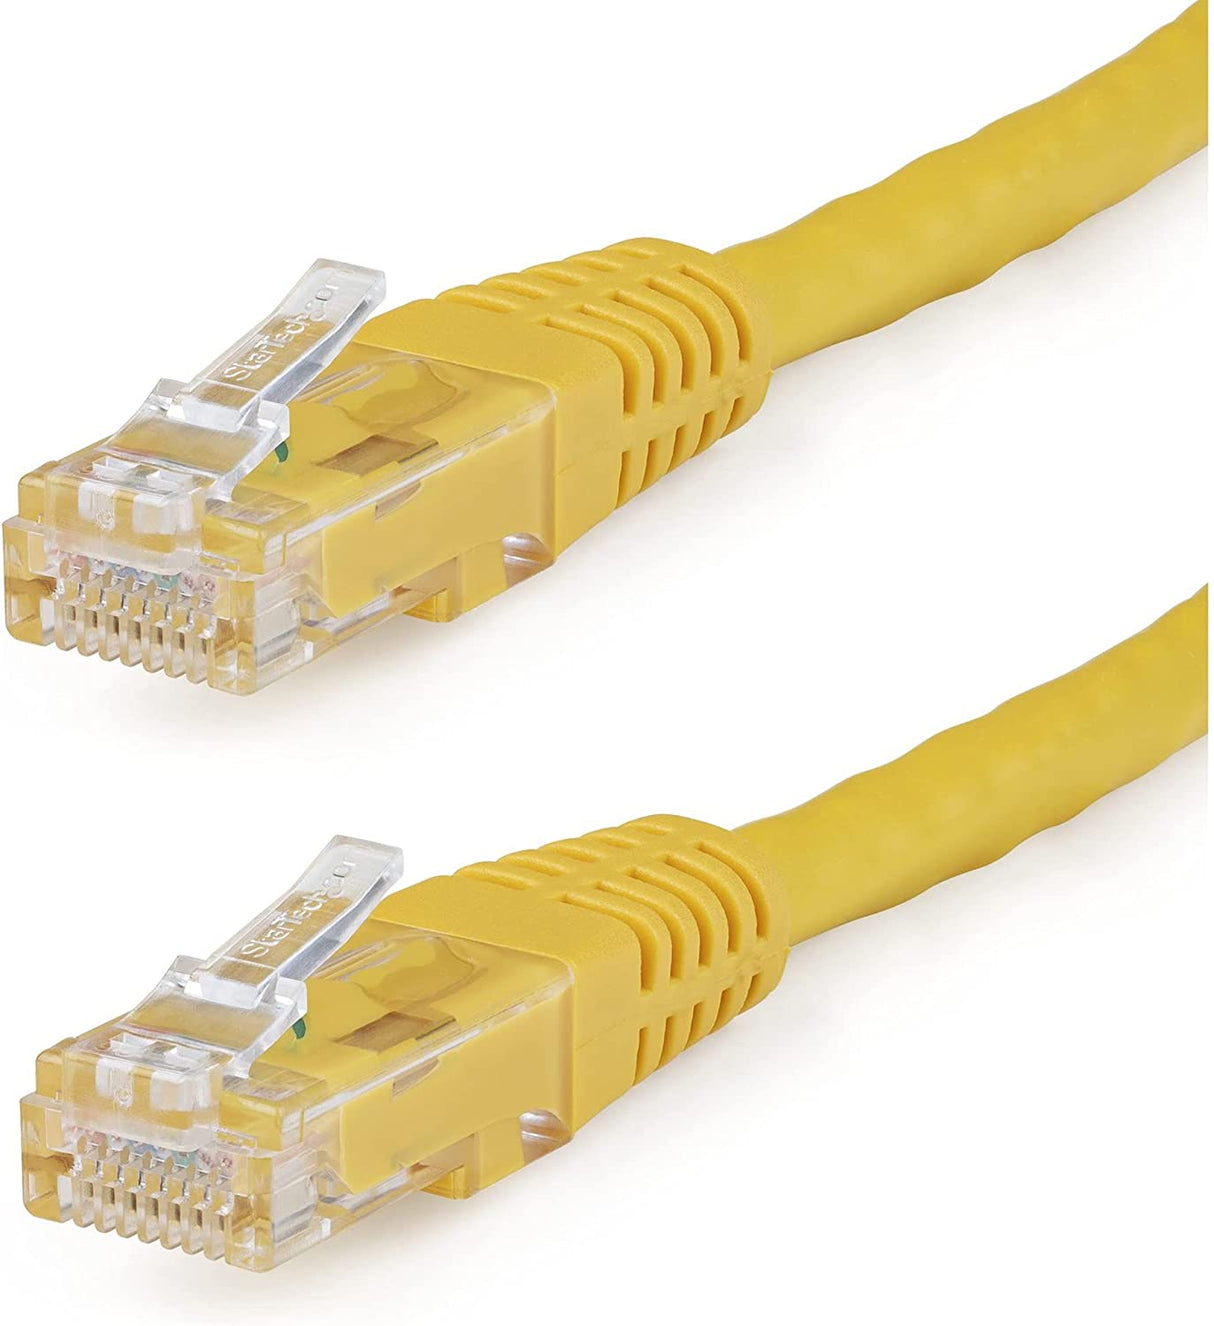 StarTech.com 75ft CAT6 Ethernet Cable - Yellow CAT 6 Gigabit Ethernet Wire -650MHz 100W PoE++ RJ45 UTP Molded Category 6 Network/Patch Cord w/Strain Relief/Fluke Tested UL/TIA Certified (C6PATCH7YL) Yellow 7 ft / 2.1 m 1 Pack